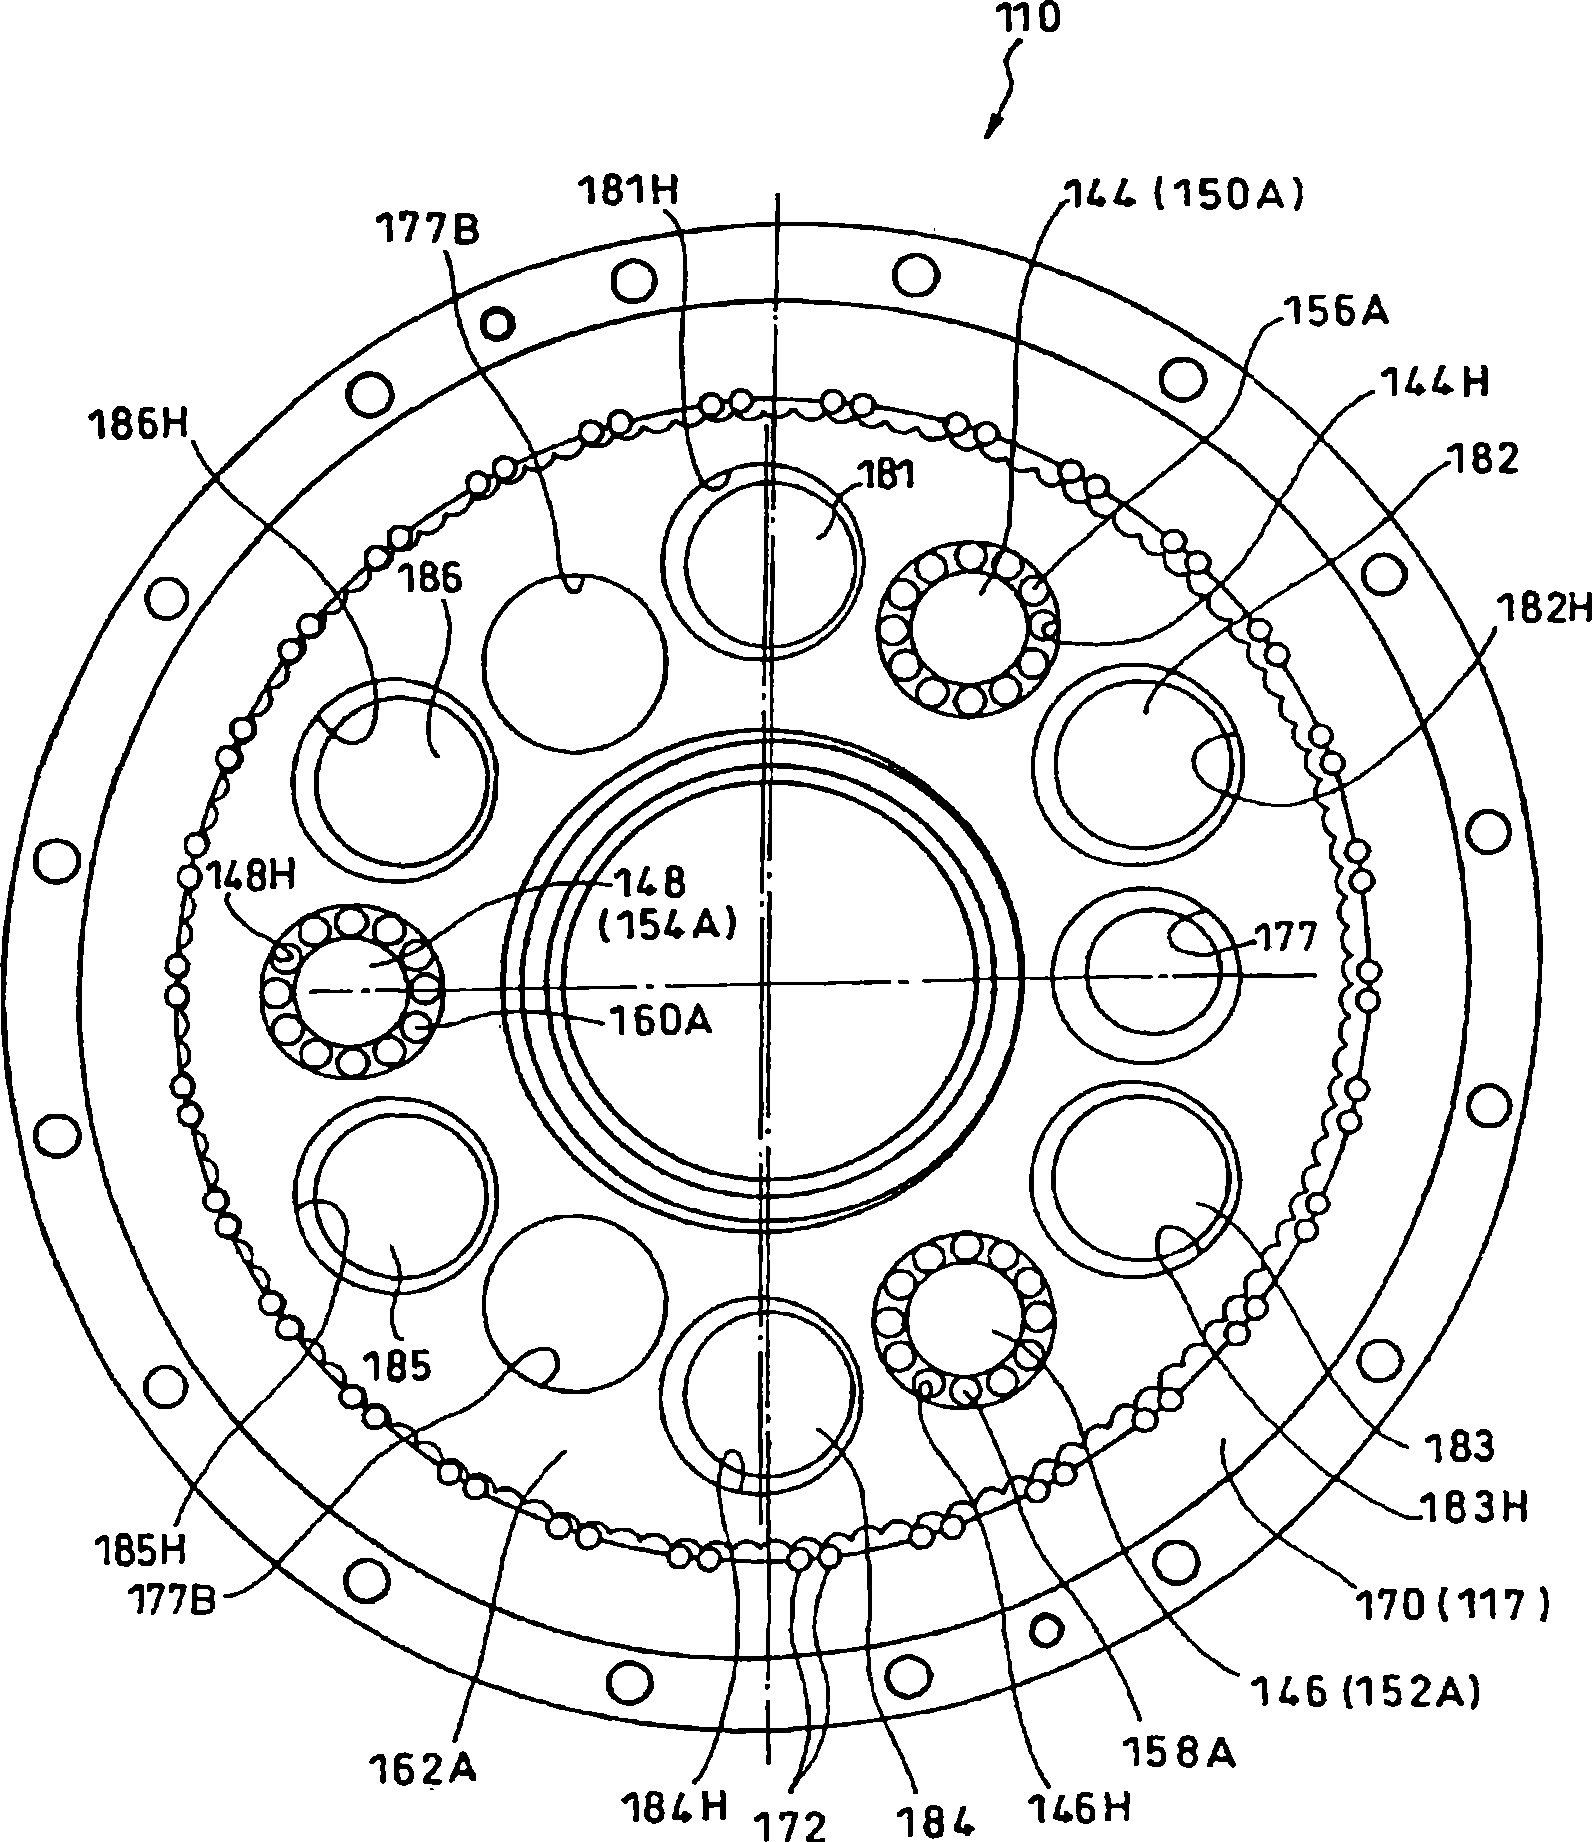 Swinging inner-connected meshed planetary gear structure